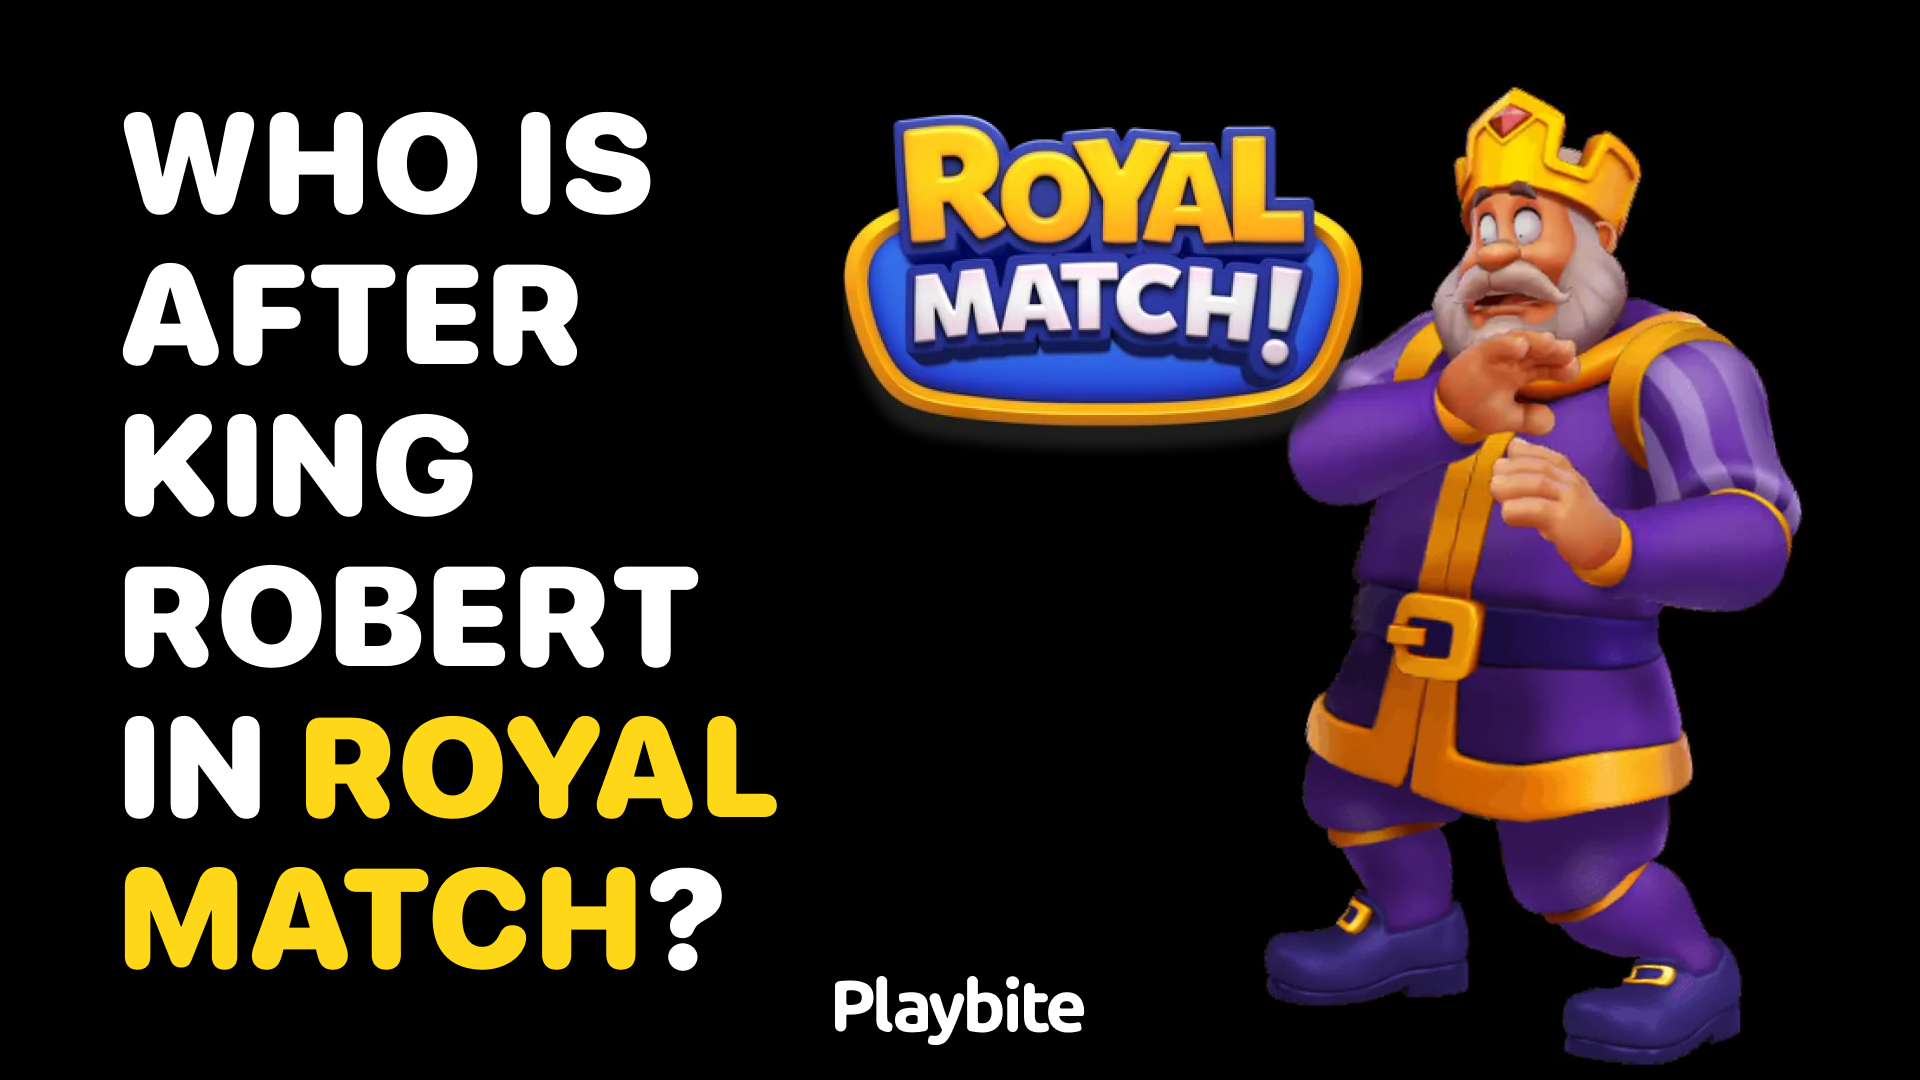 Who Is After King Robert In Royal Match?